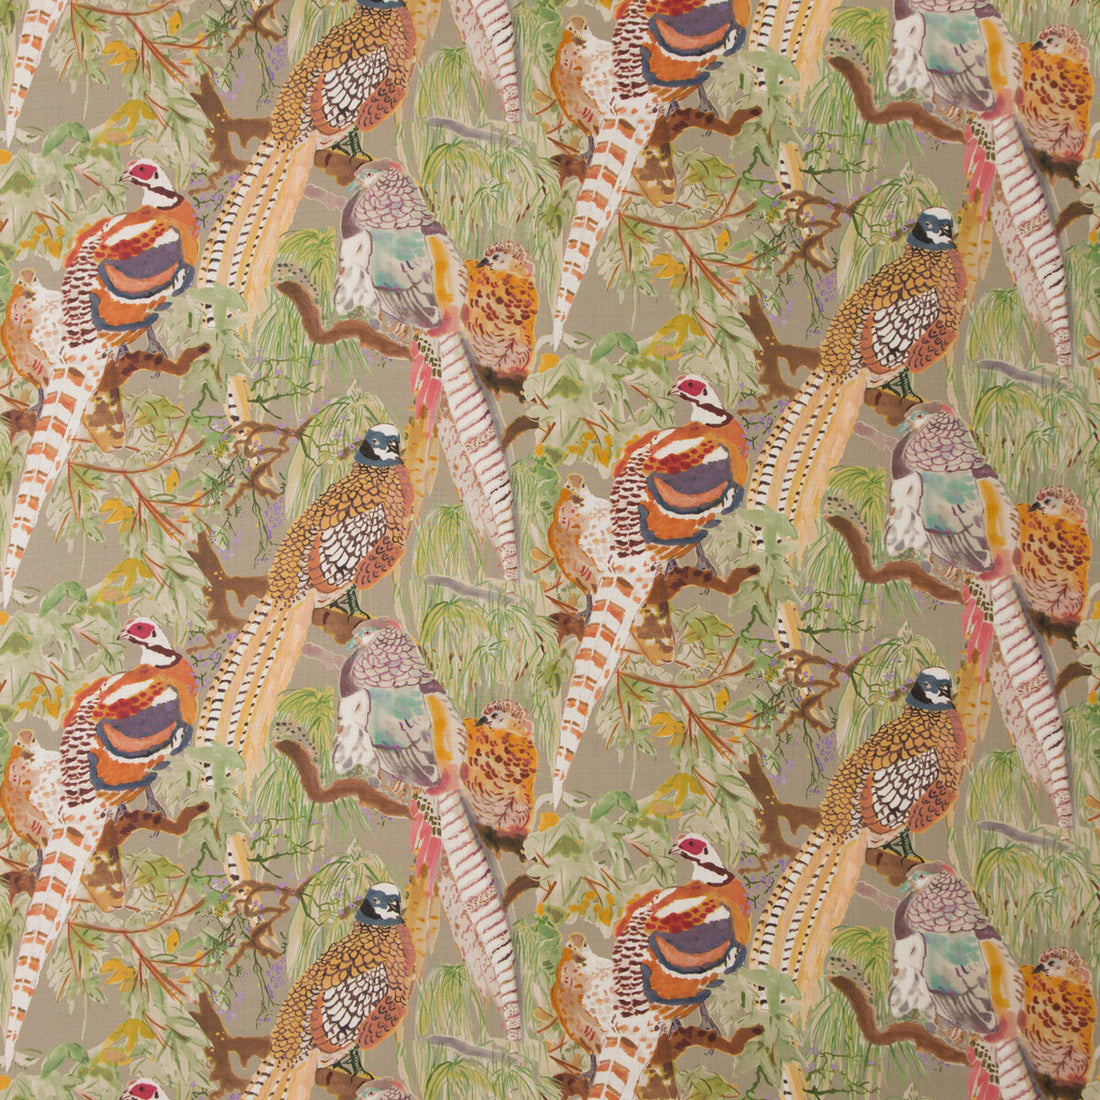 Game Birds Linen fabric in stone/multi color - pattern FD269.K102.0 - by Mulberry in the Bohemian Romance collection